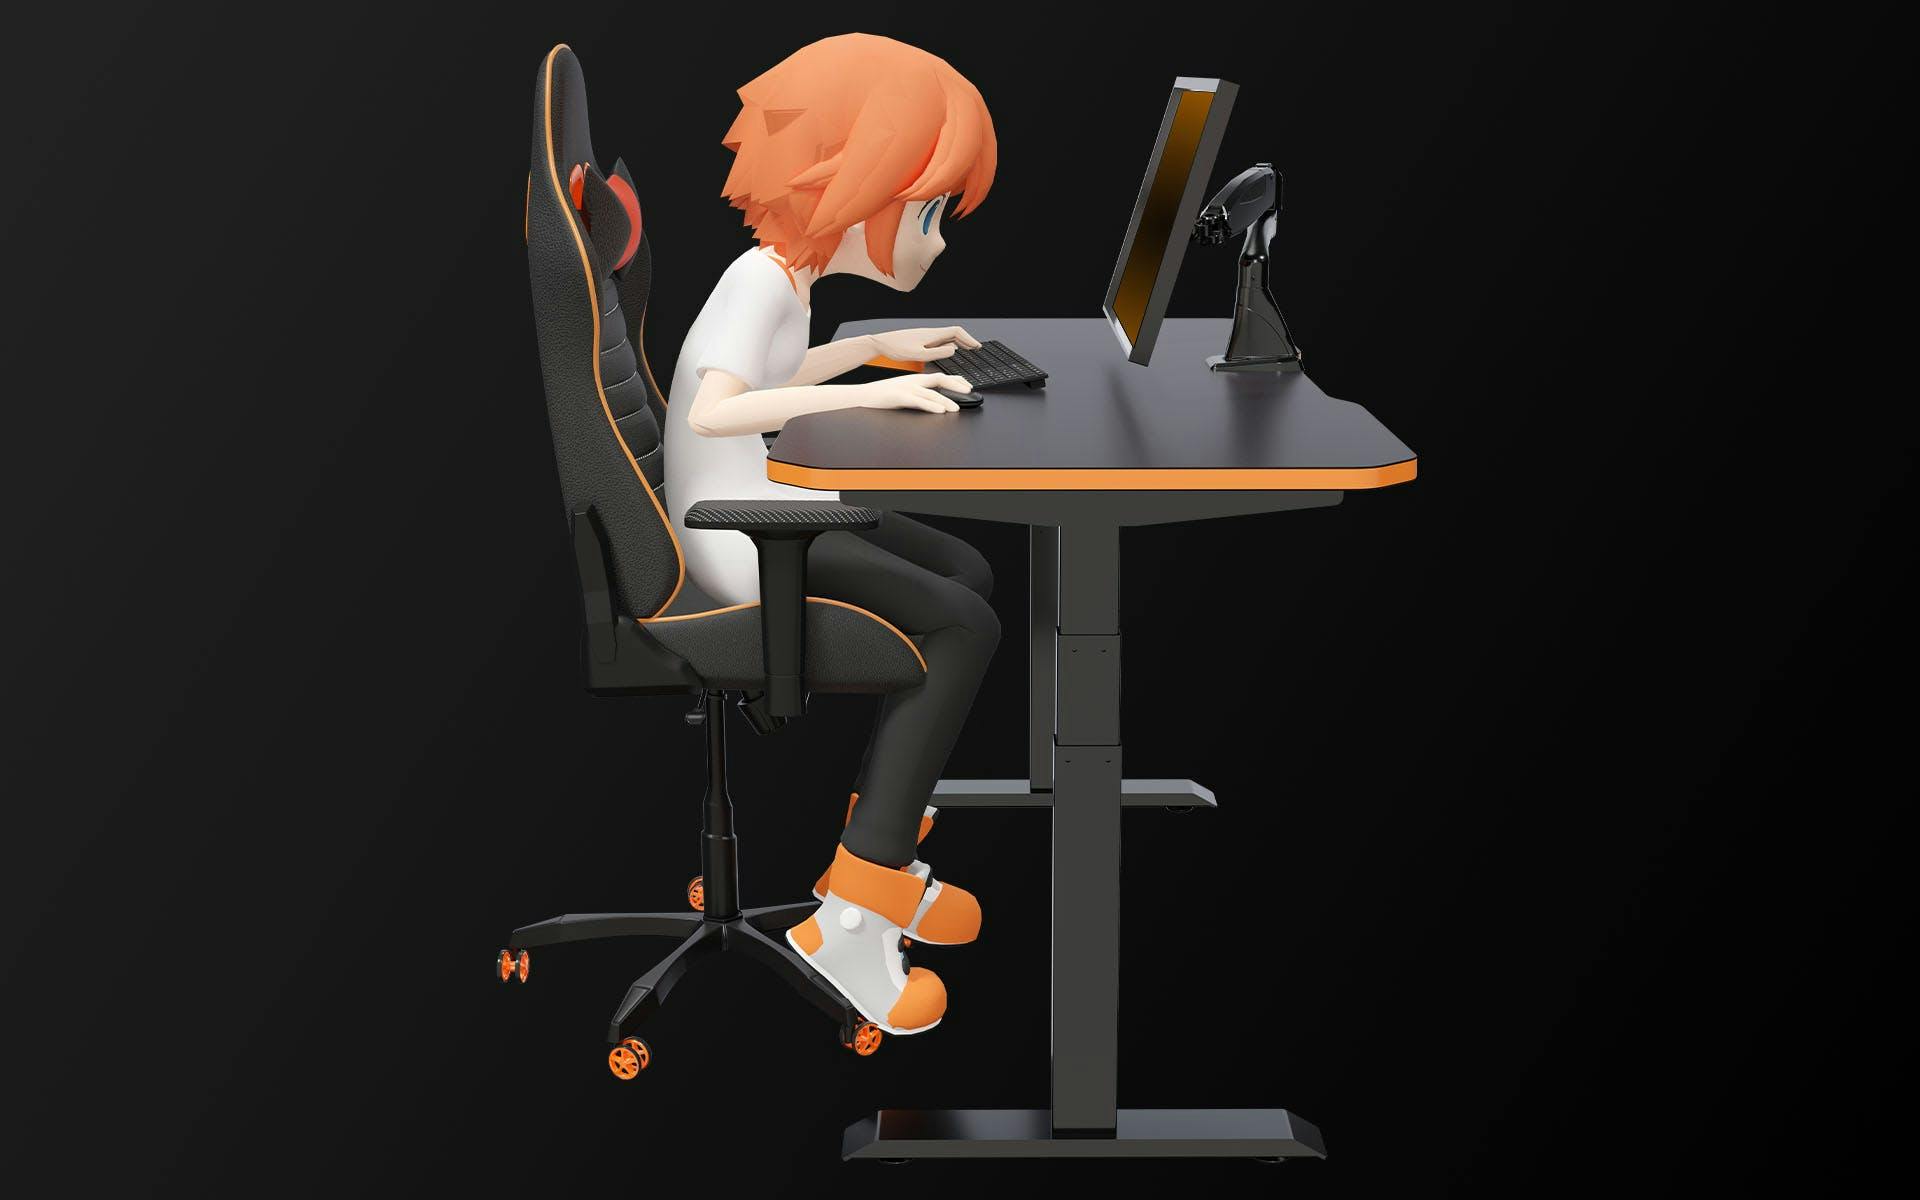 Sitting at an incorrectly adjusted desk for too long affects performance